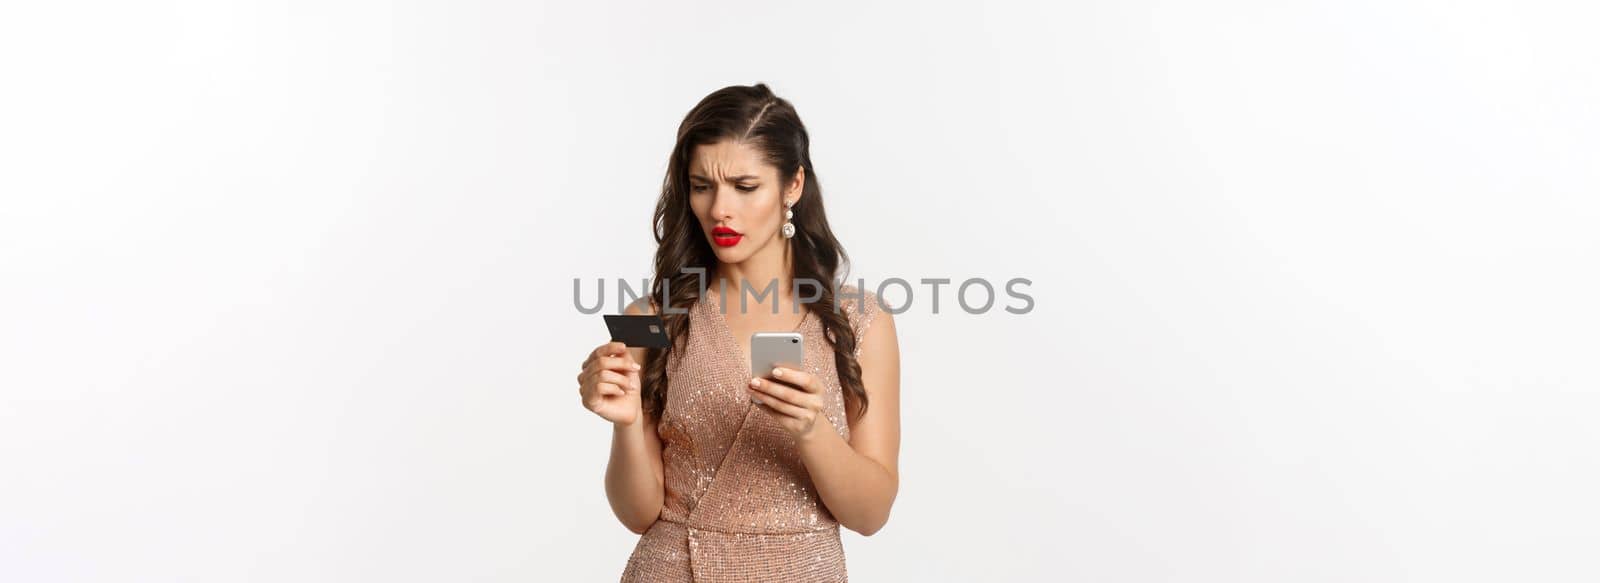 Online shopping and holidays concept. Stylish woman in elegant dress, looking confused at credit card while paying on mobile phone, white background.